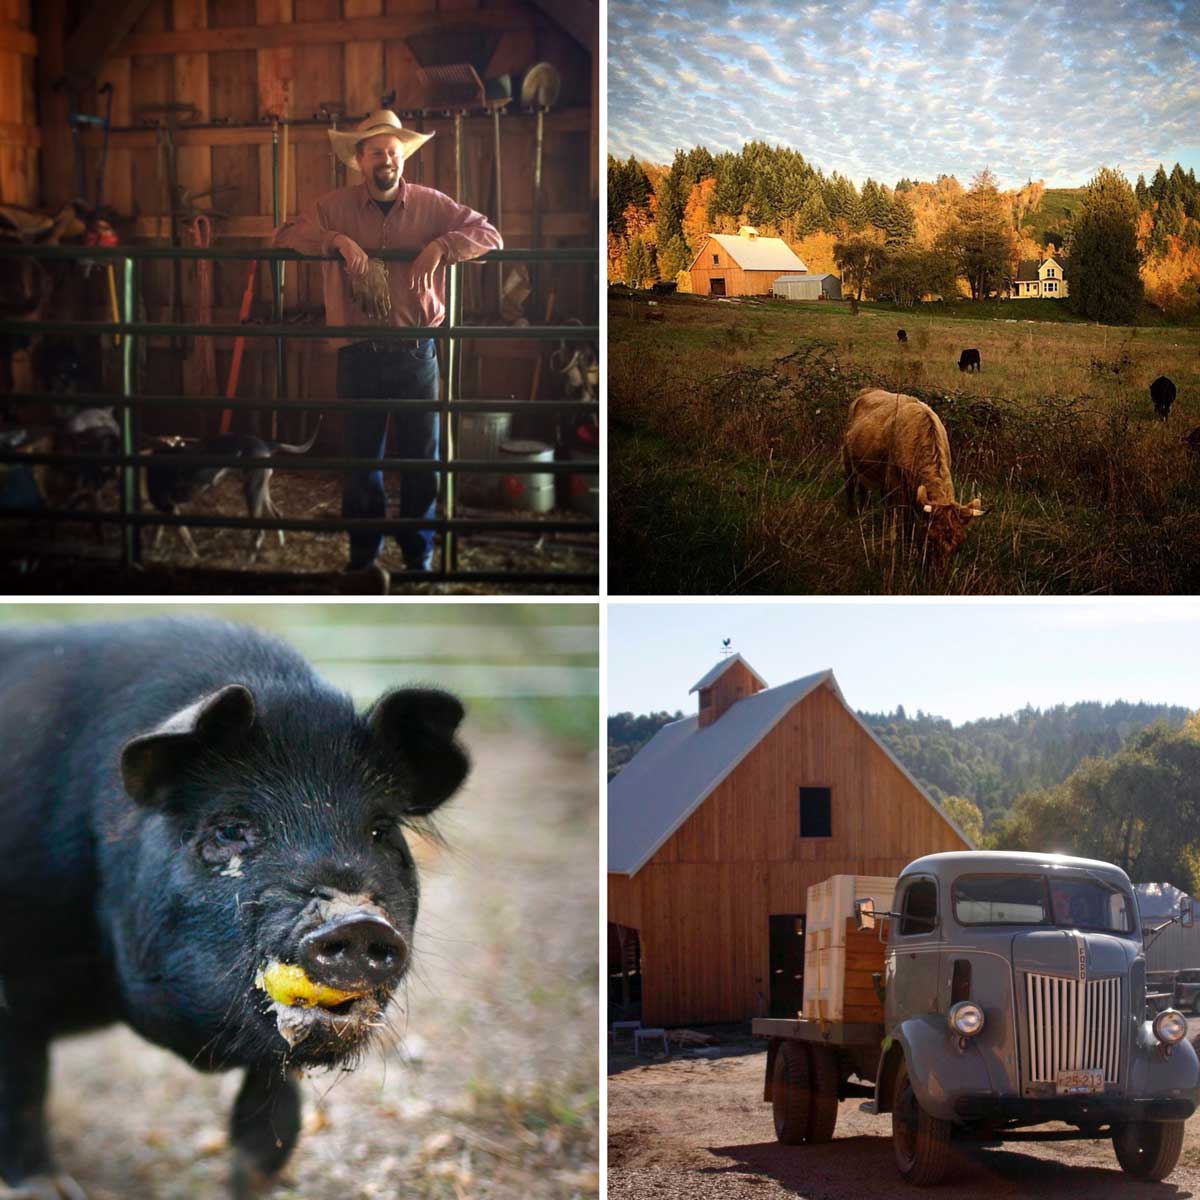  Big Table Farm Collage – Brian in the Barn, Cows Grazing, Pig Eating, and the Vintage Flatbed Truck Delivering to the Barn. 